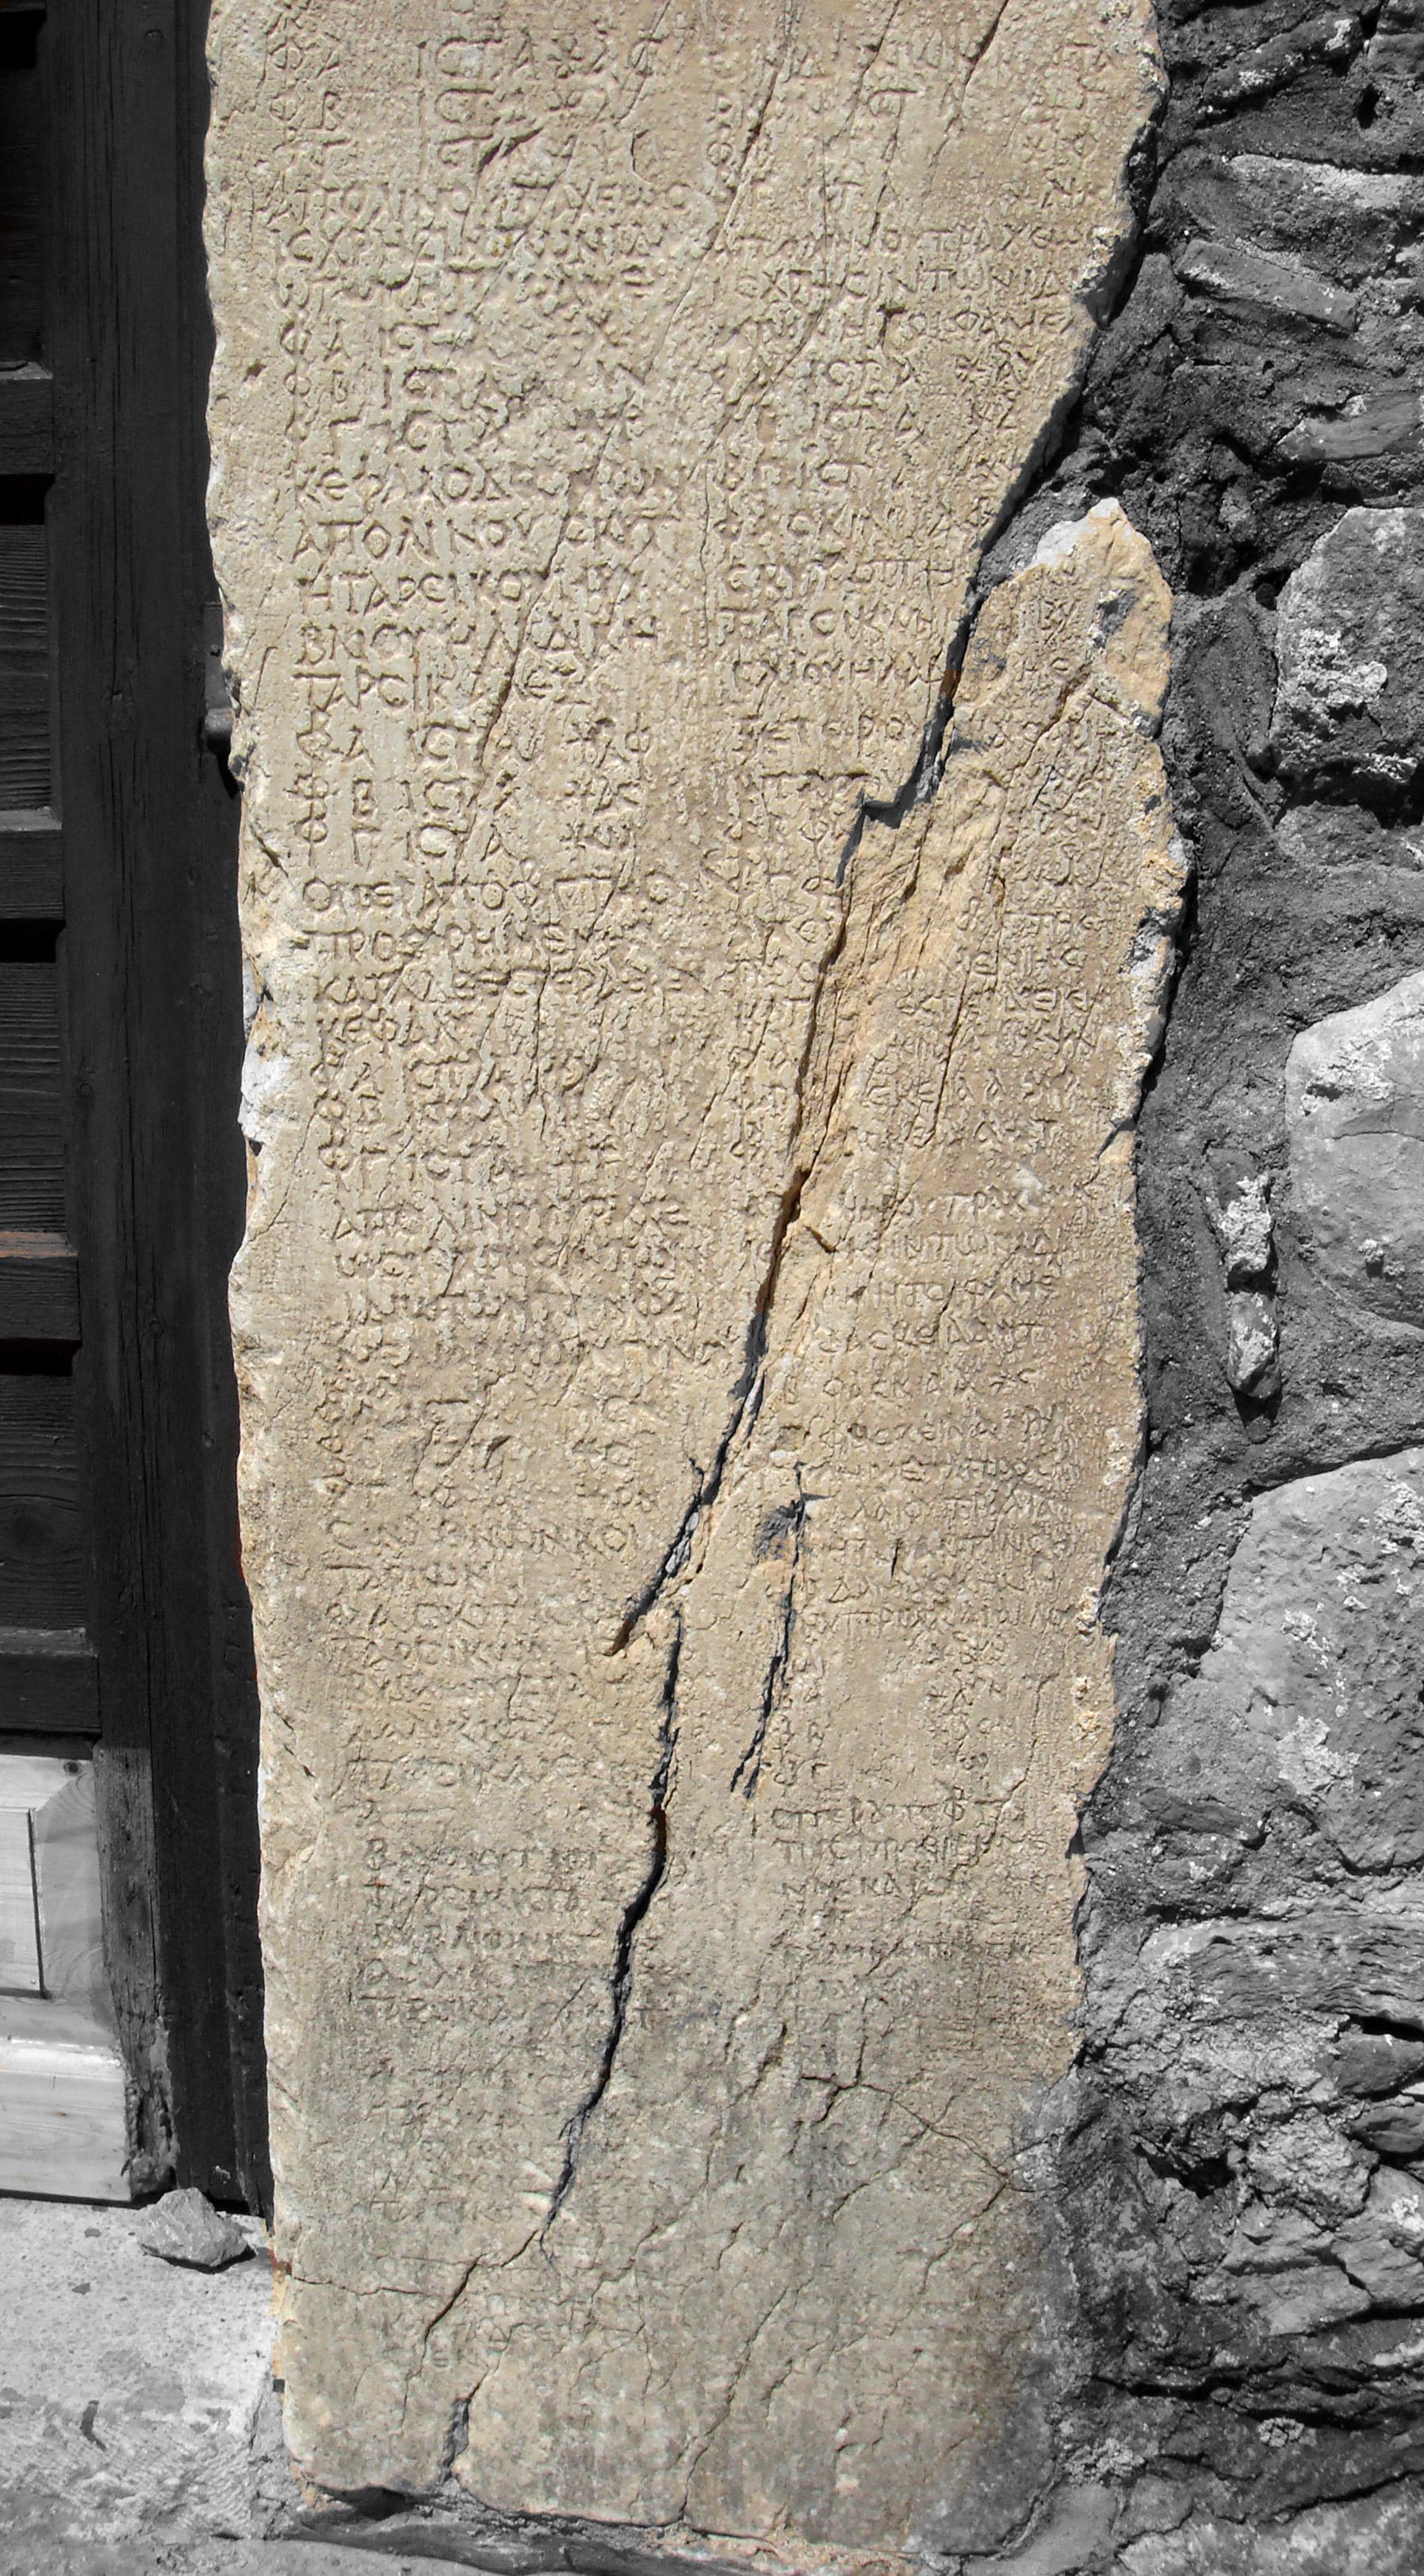 The Edict Of Maximum Prices Issued By Emperor Diocletian During